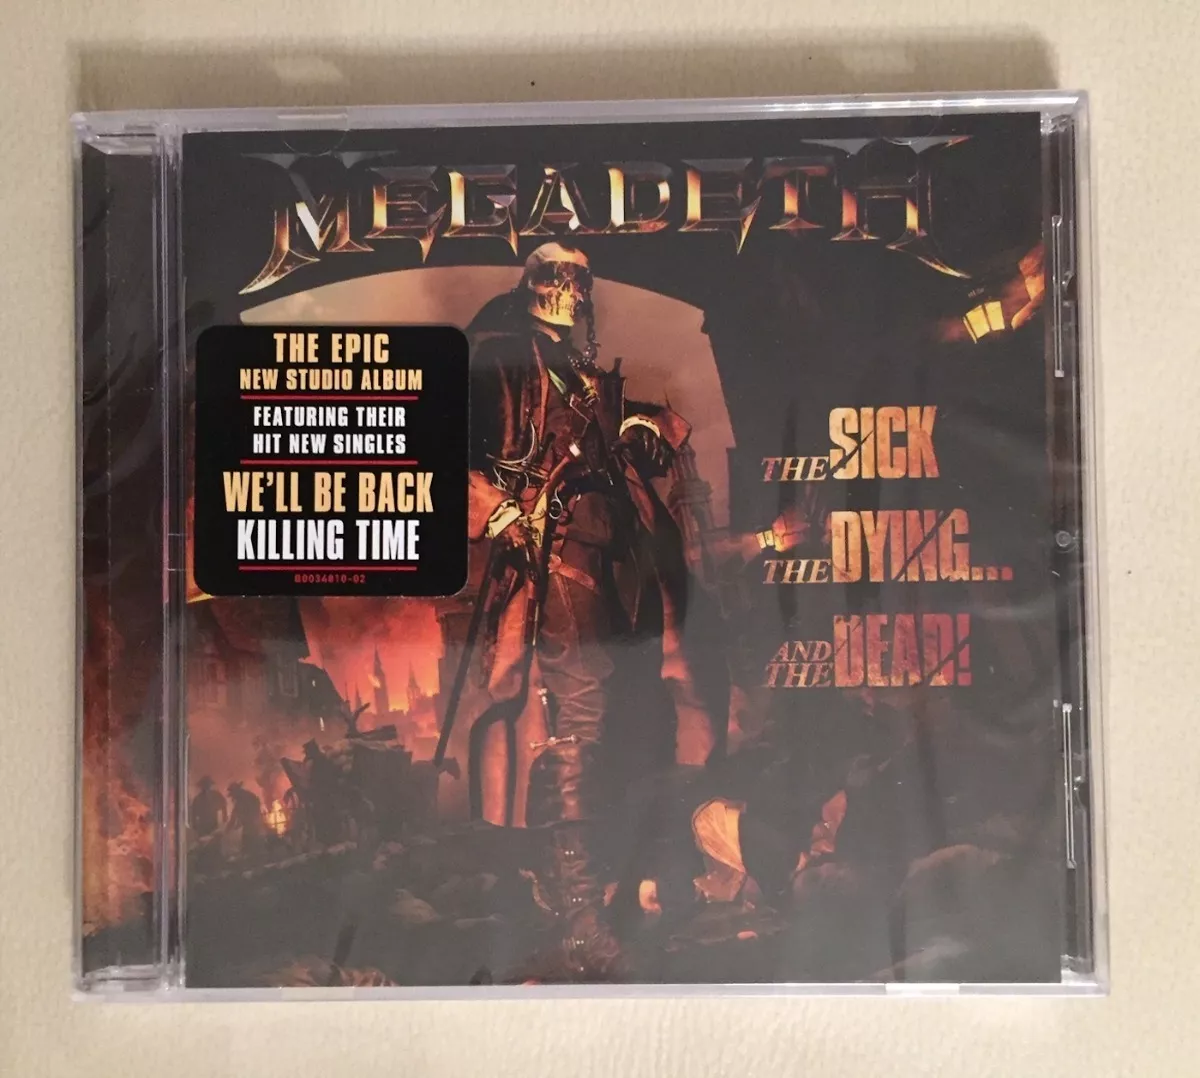 Megadeth The Sick The Dying And The Dead! Cd / Usa / Nuevo